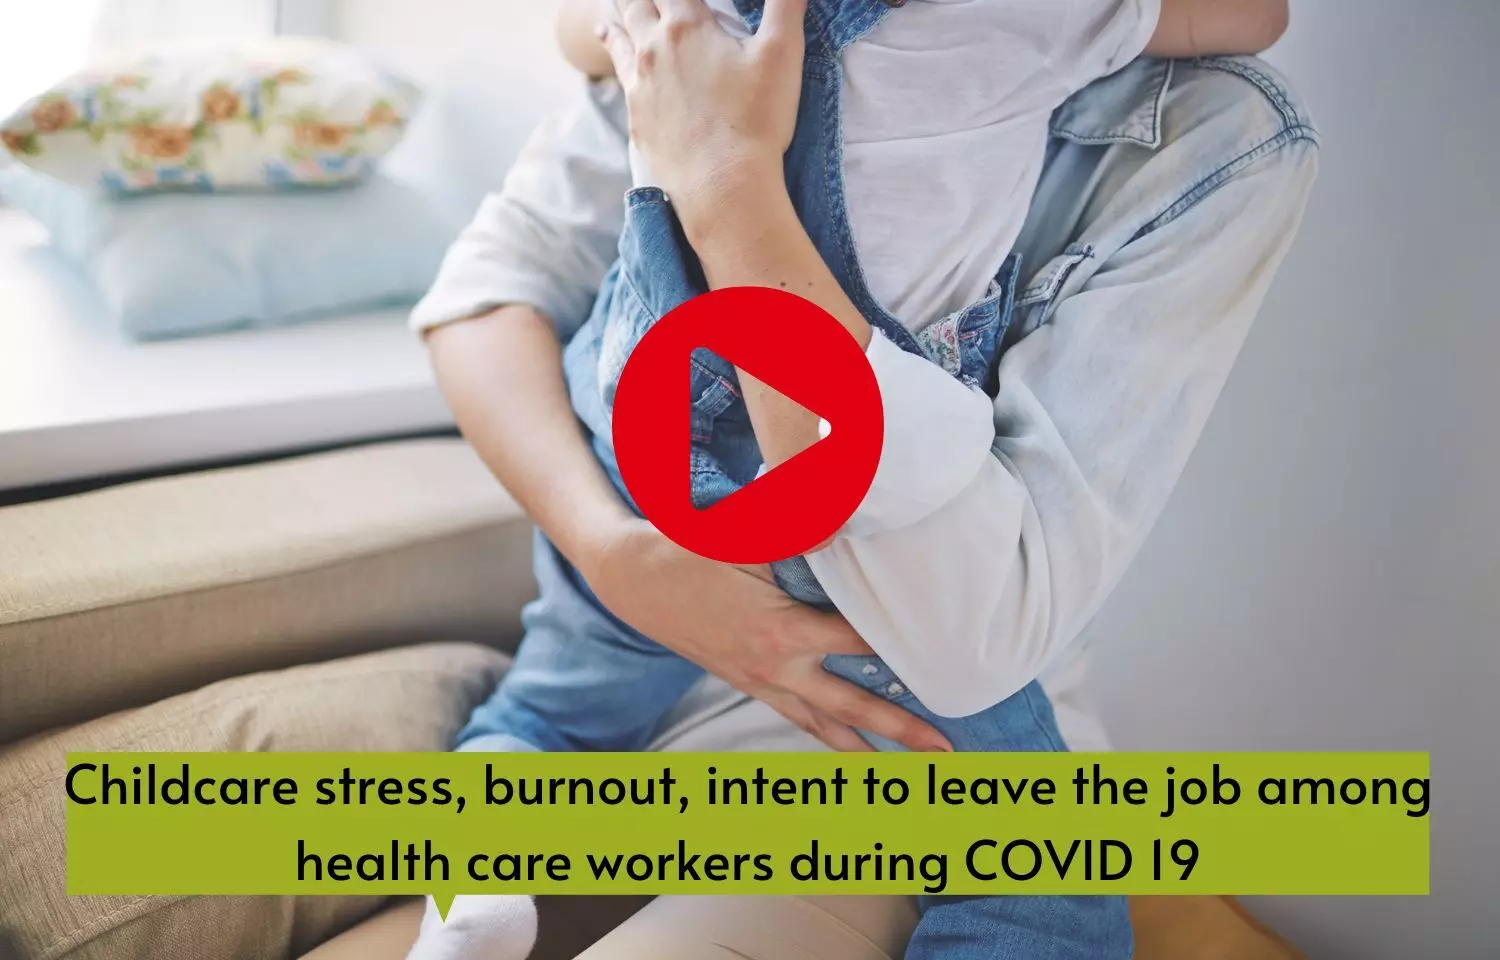 Childcare stress, burnout, intent to leave the job among health care workers during COVID 19